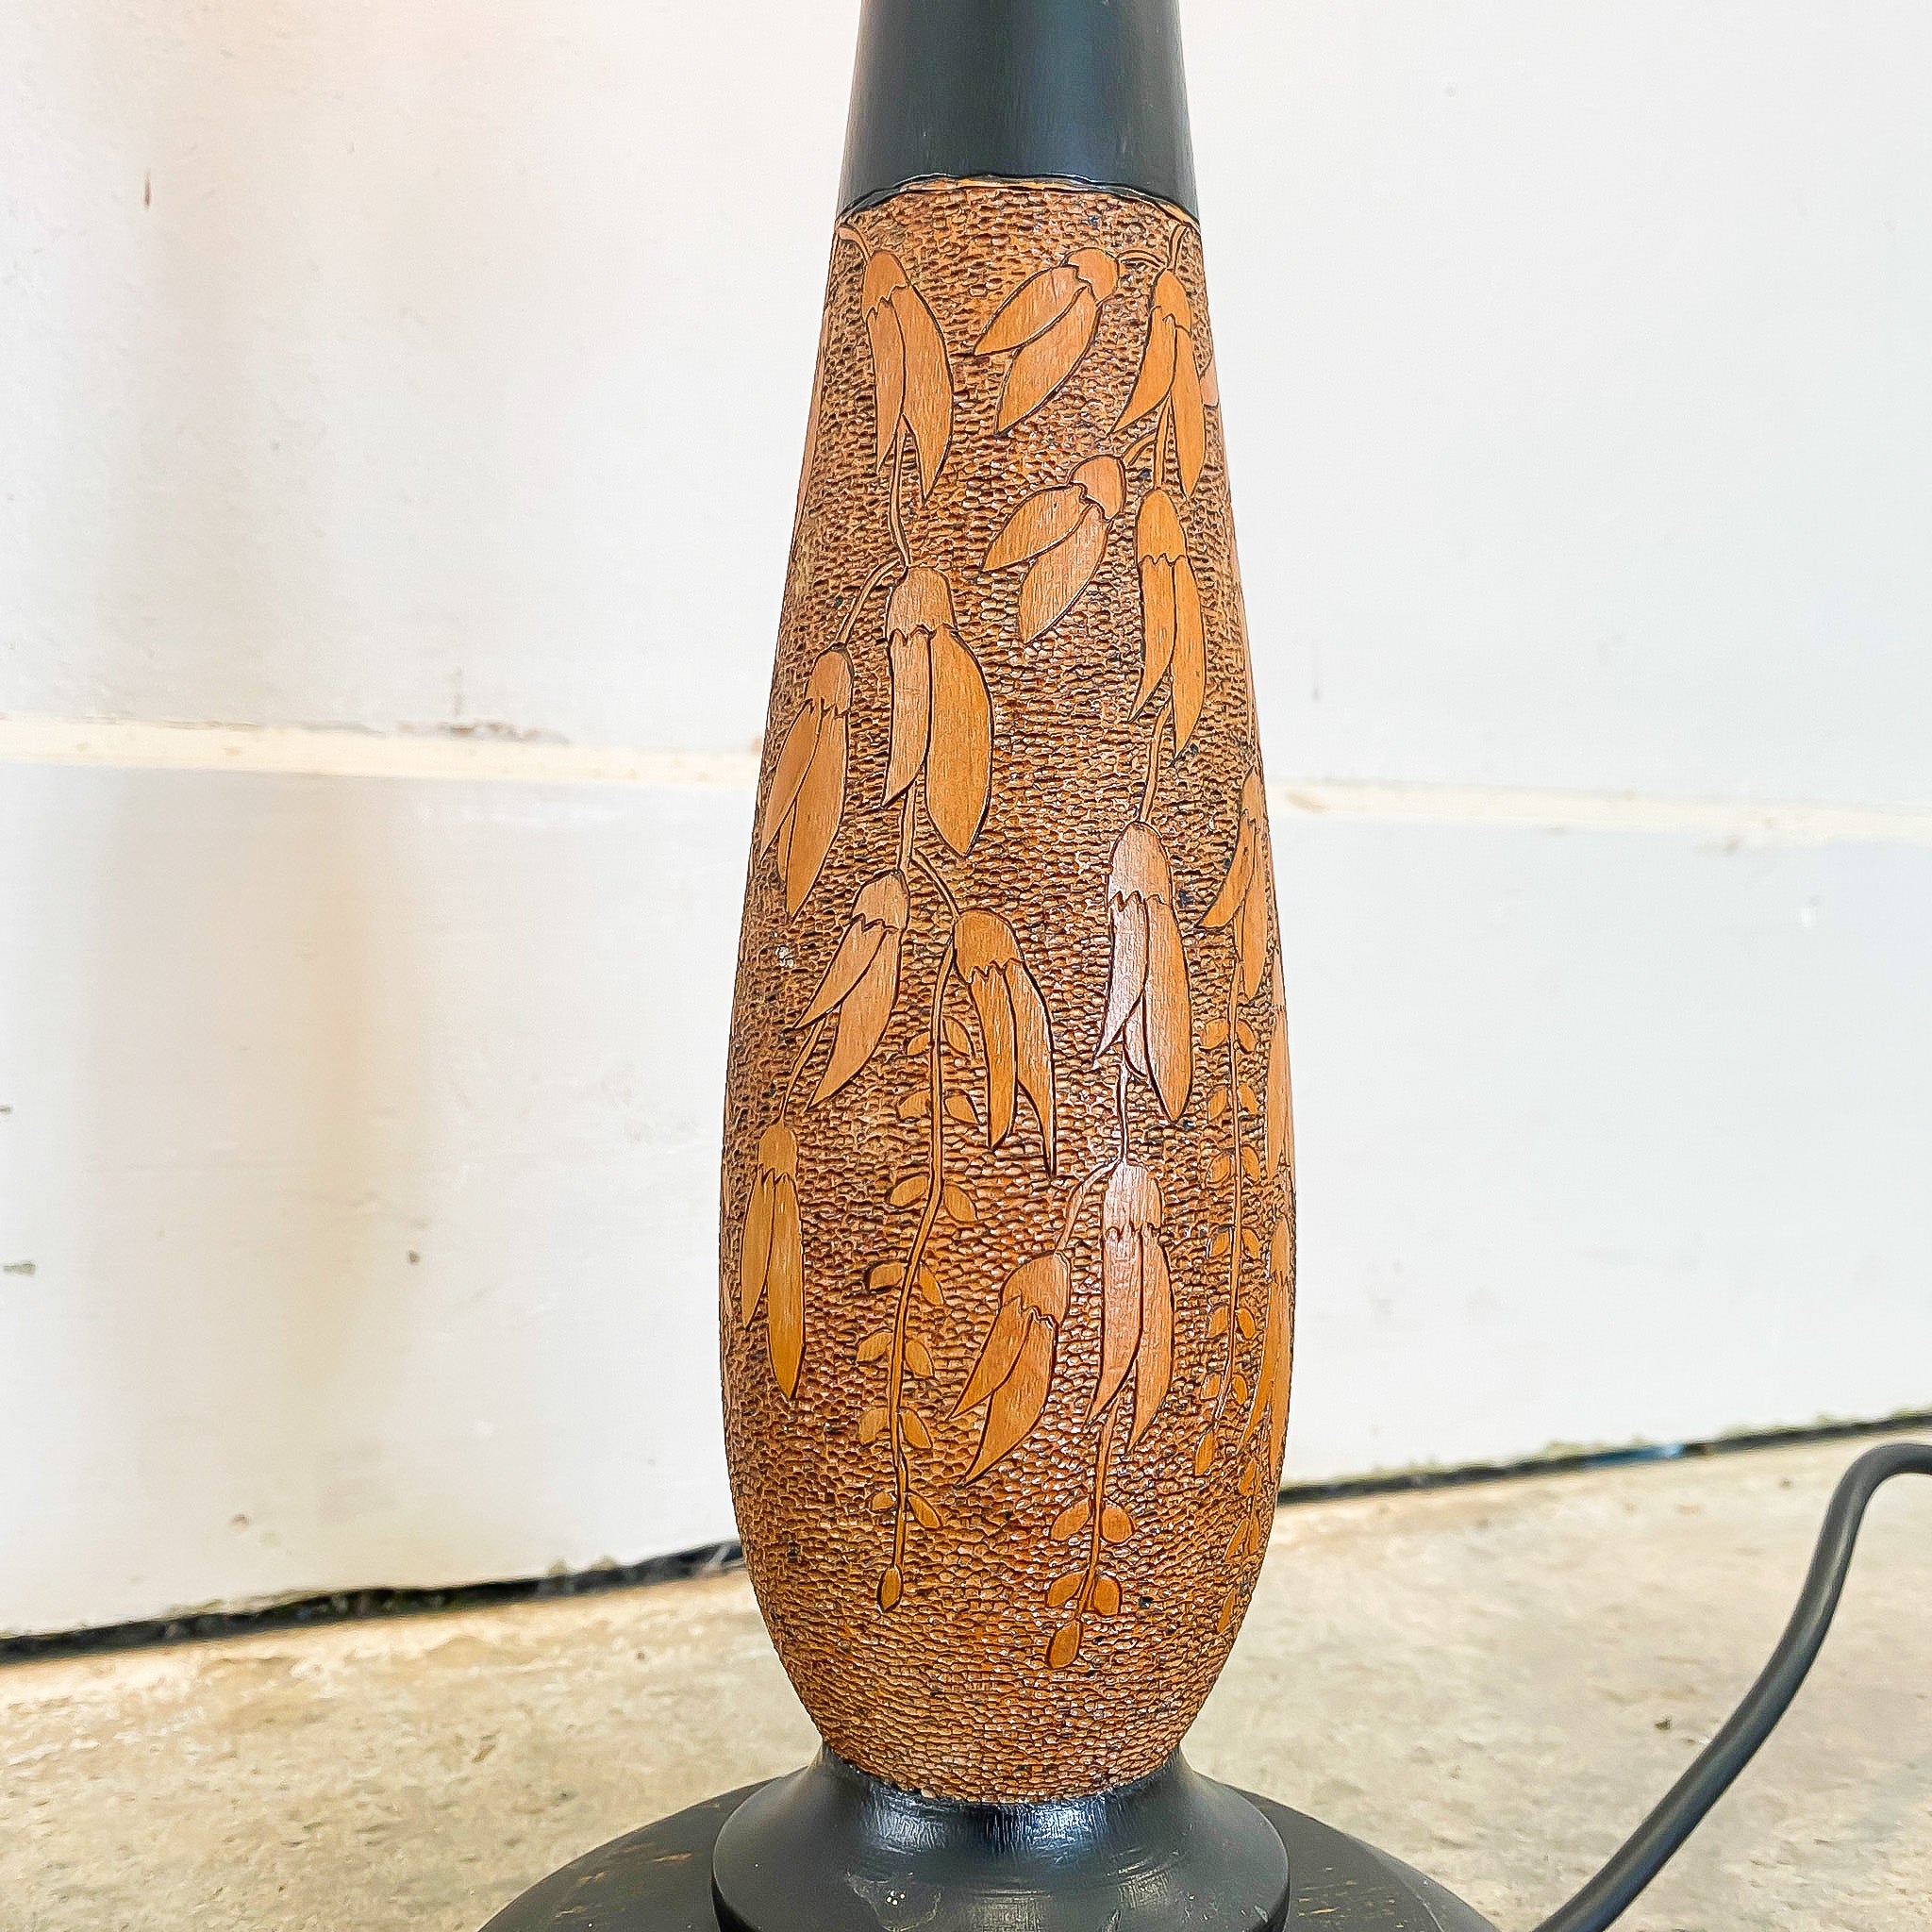 Early New Zealand Colonial Lamp